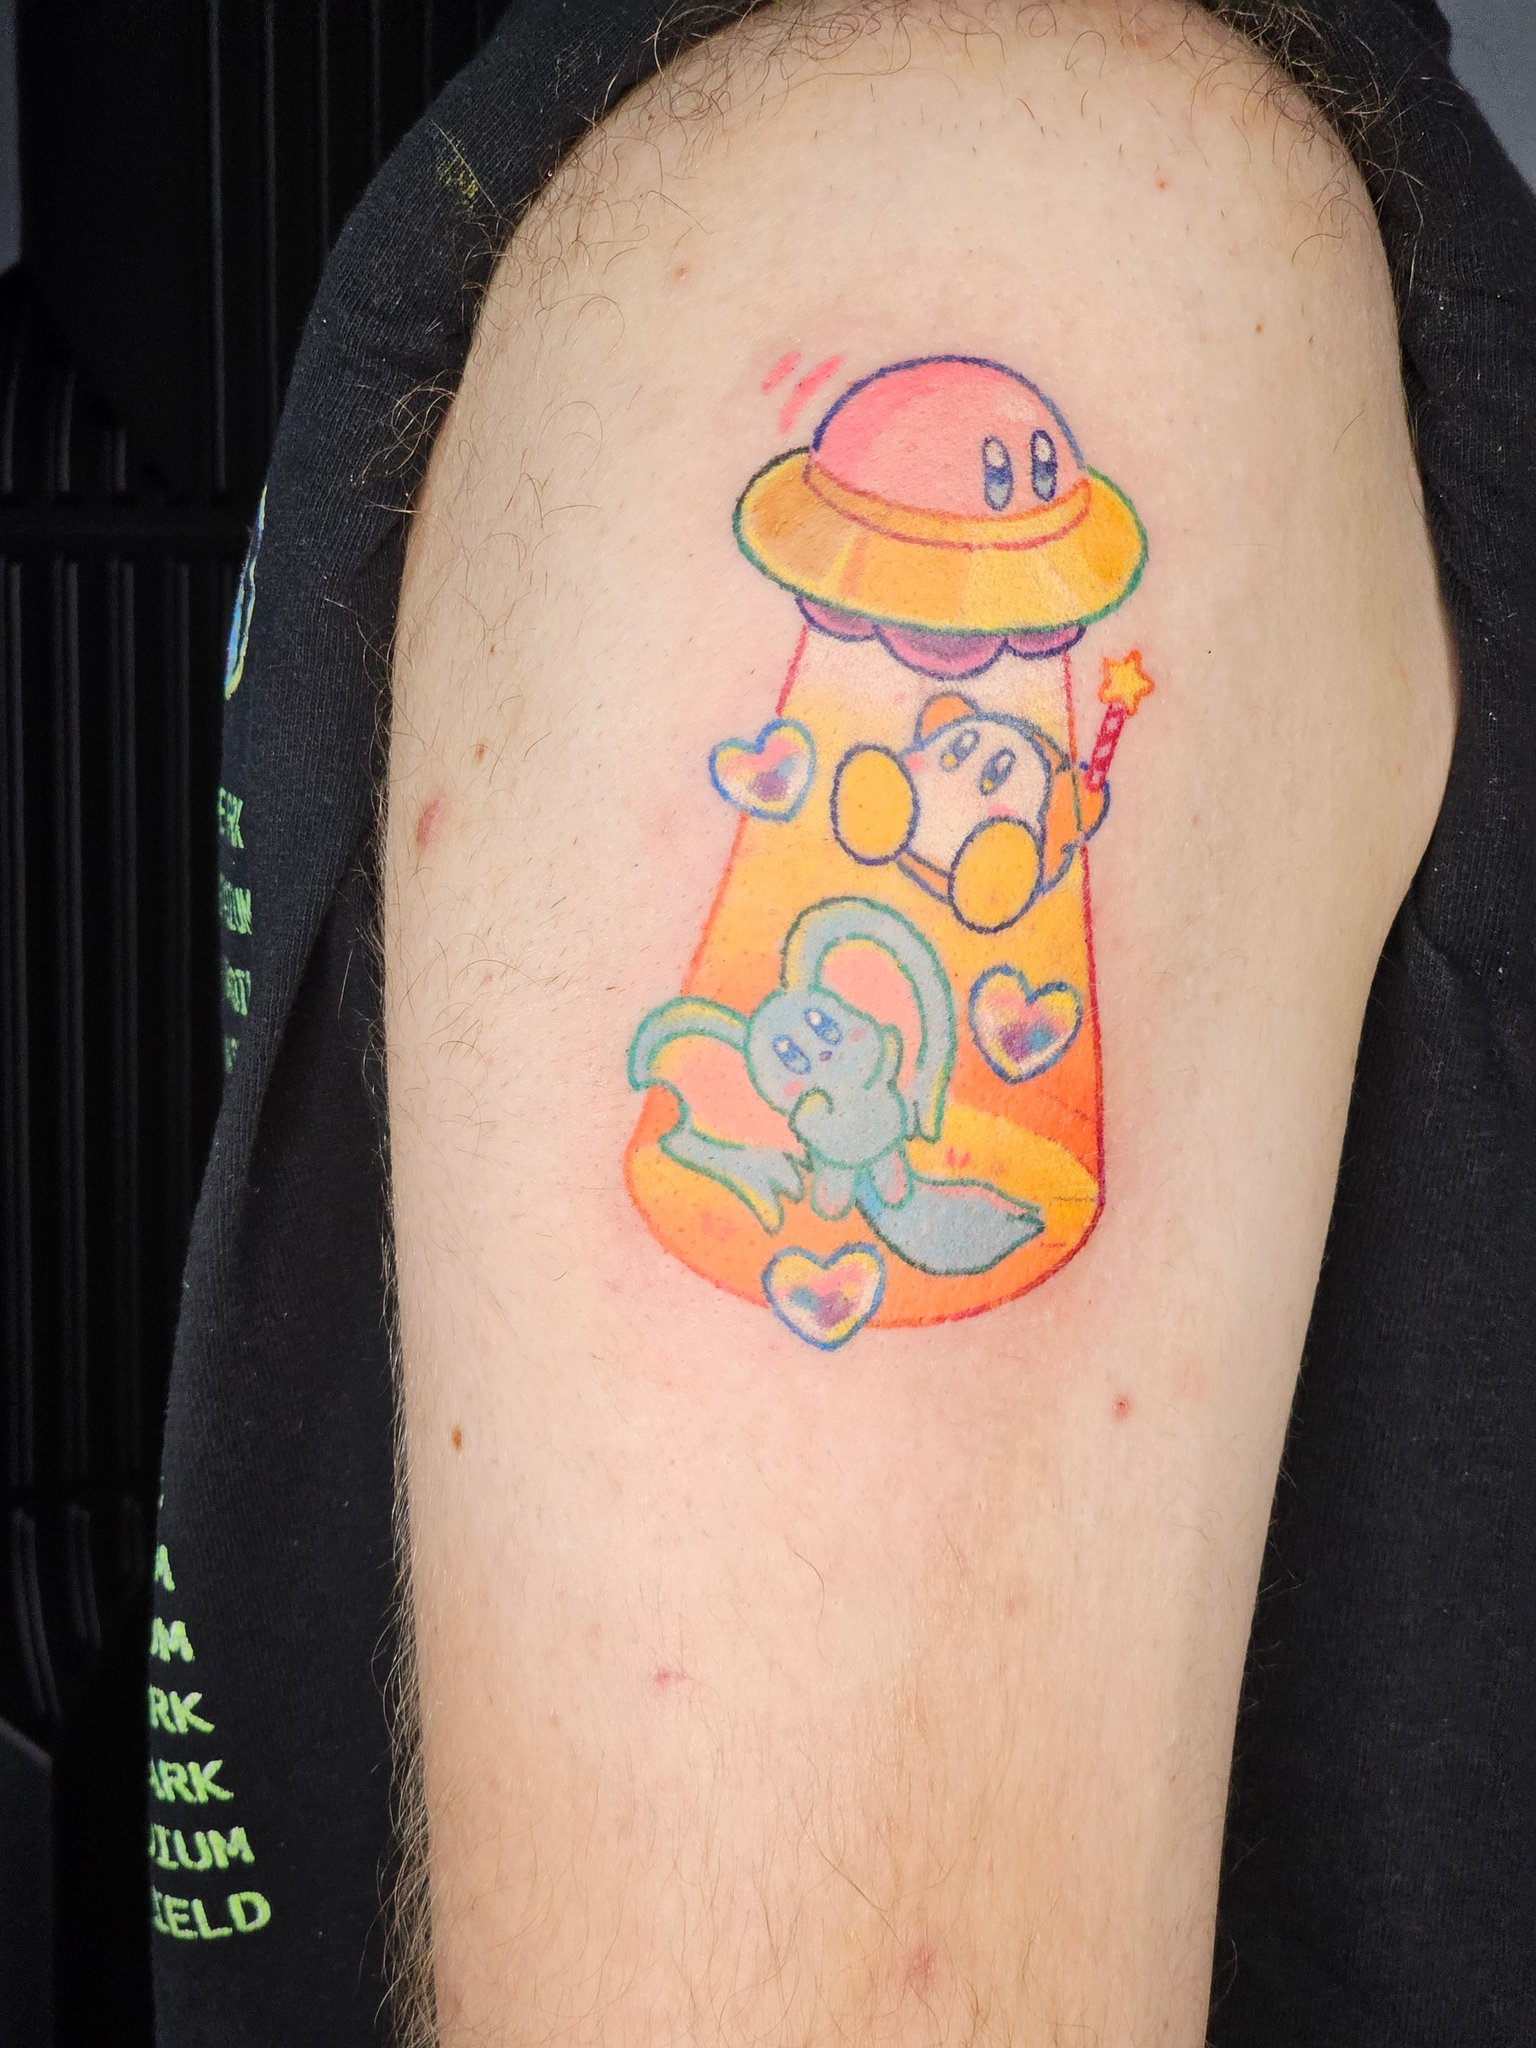 Kirby on X: I got a new tattoo today. UFO Kirby, Waddle Dee, and